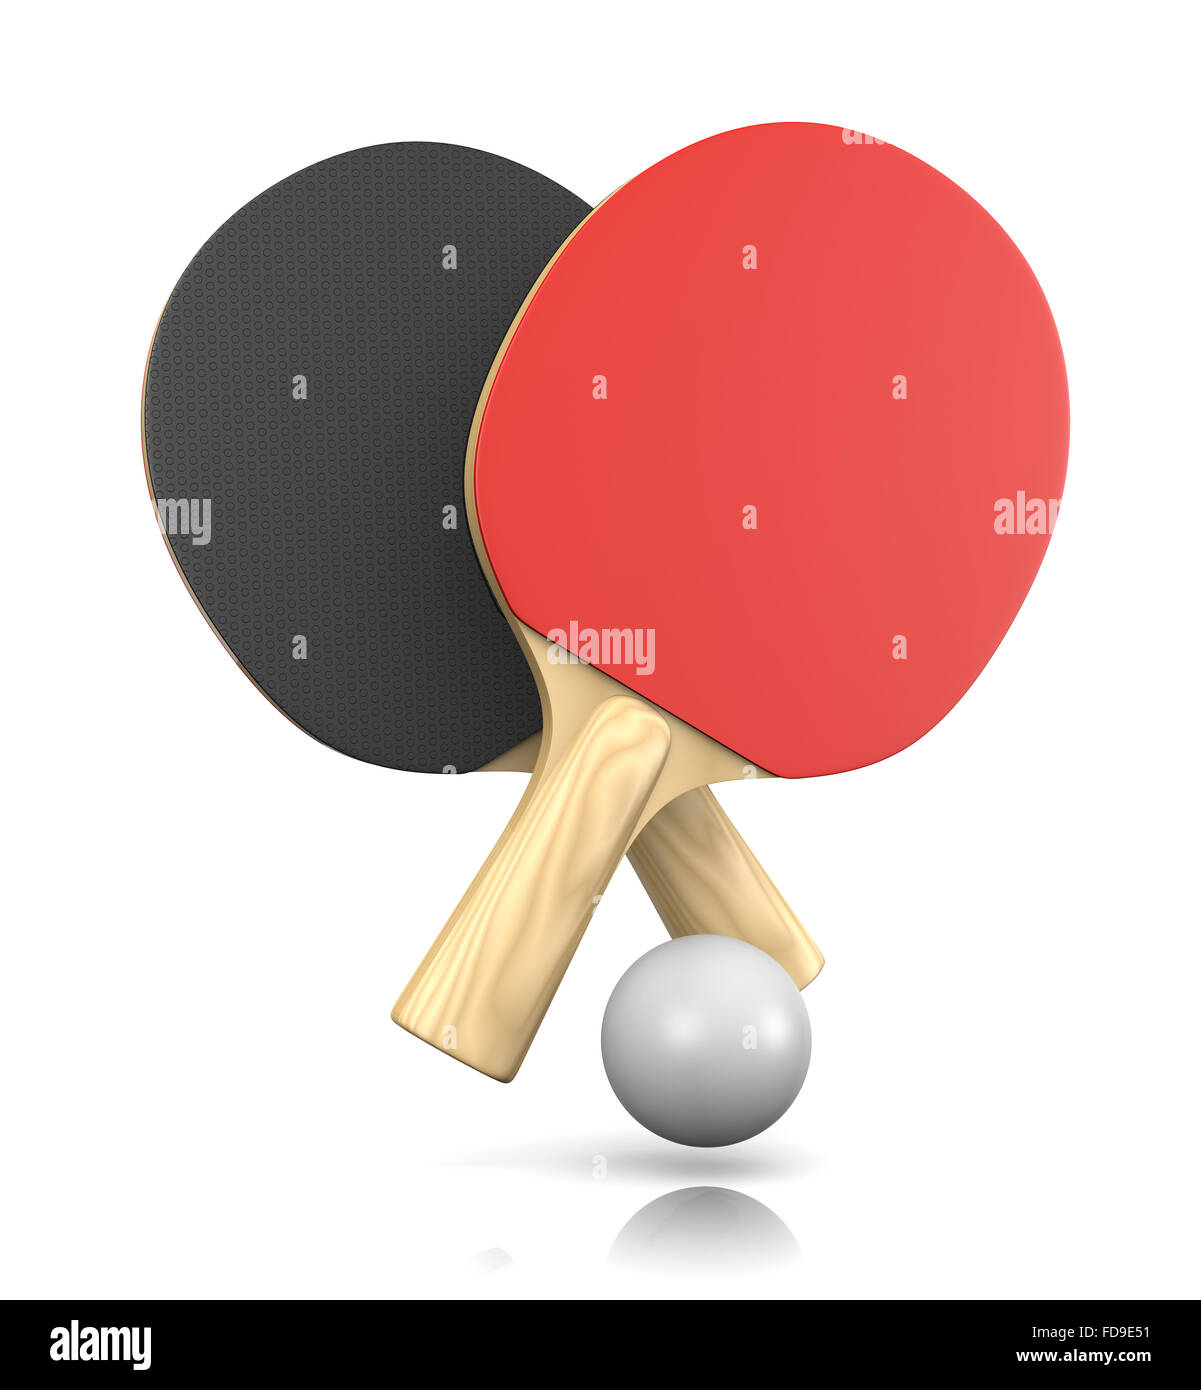 Two Ping-Pong Bats and One Ball 3D Illustration on White Background Stock Photo